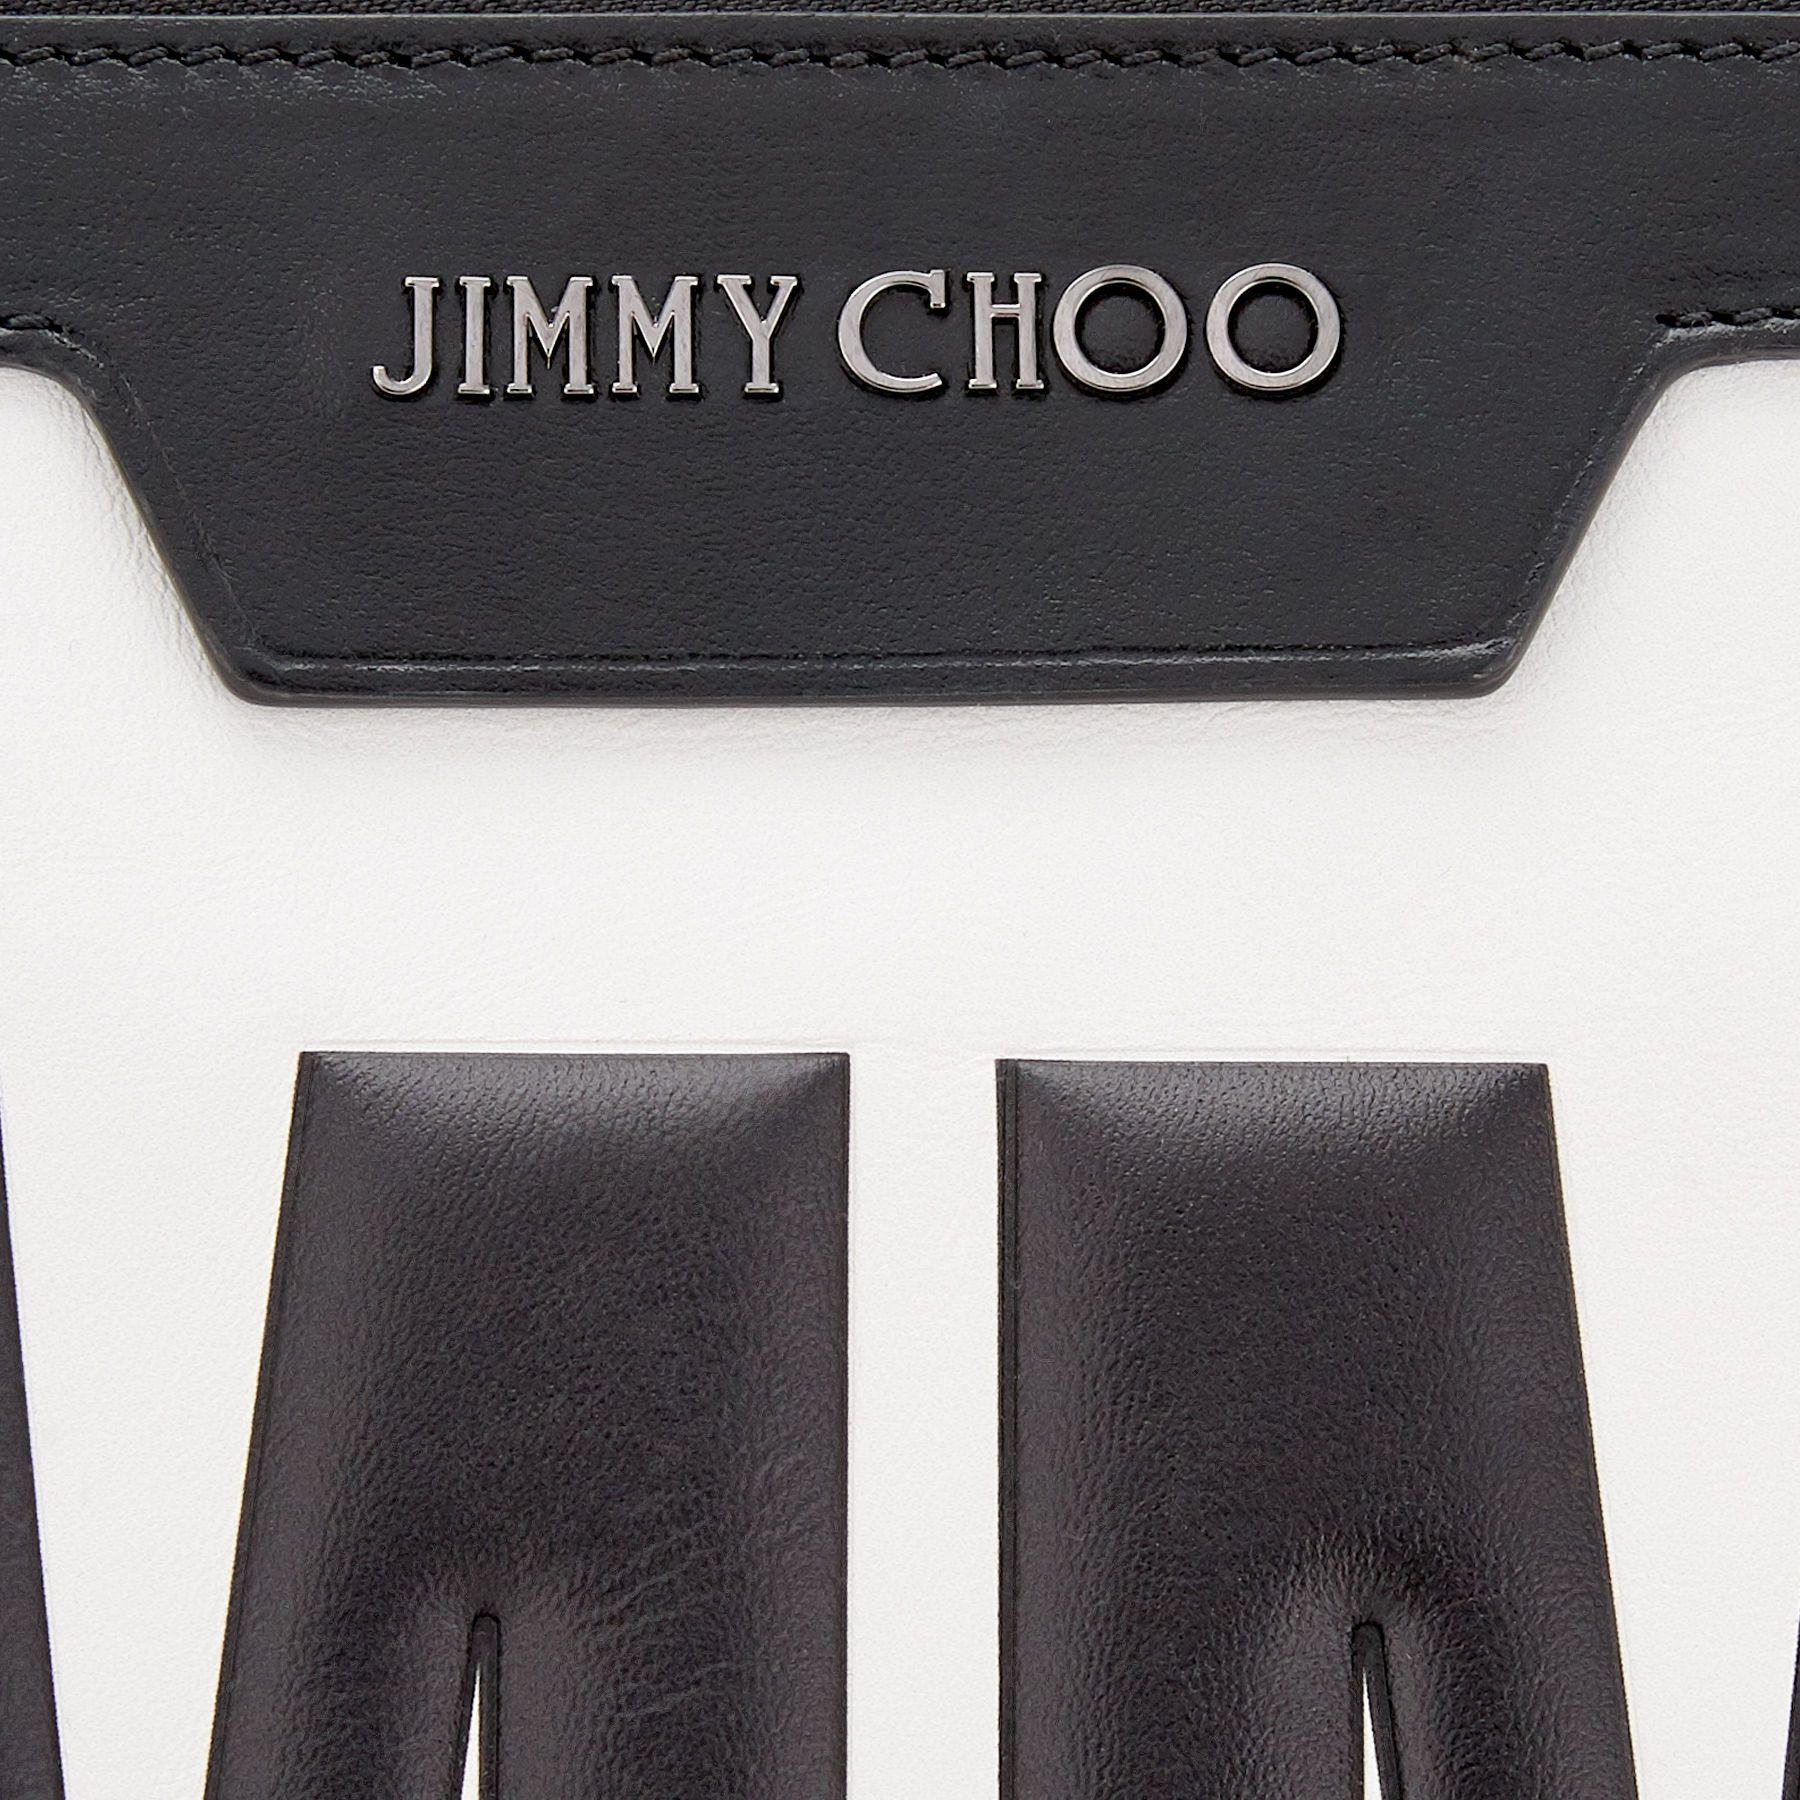 Jimmy Choo Logo - Black and White Bicolour Leather Document Holder with Embossed Jimmy